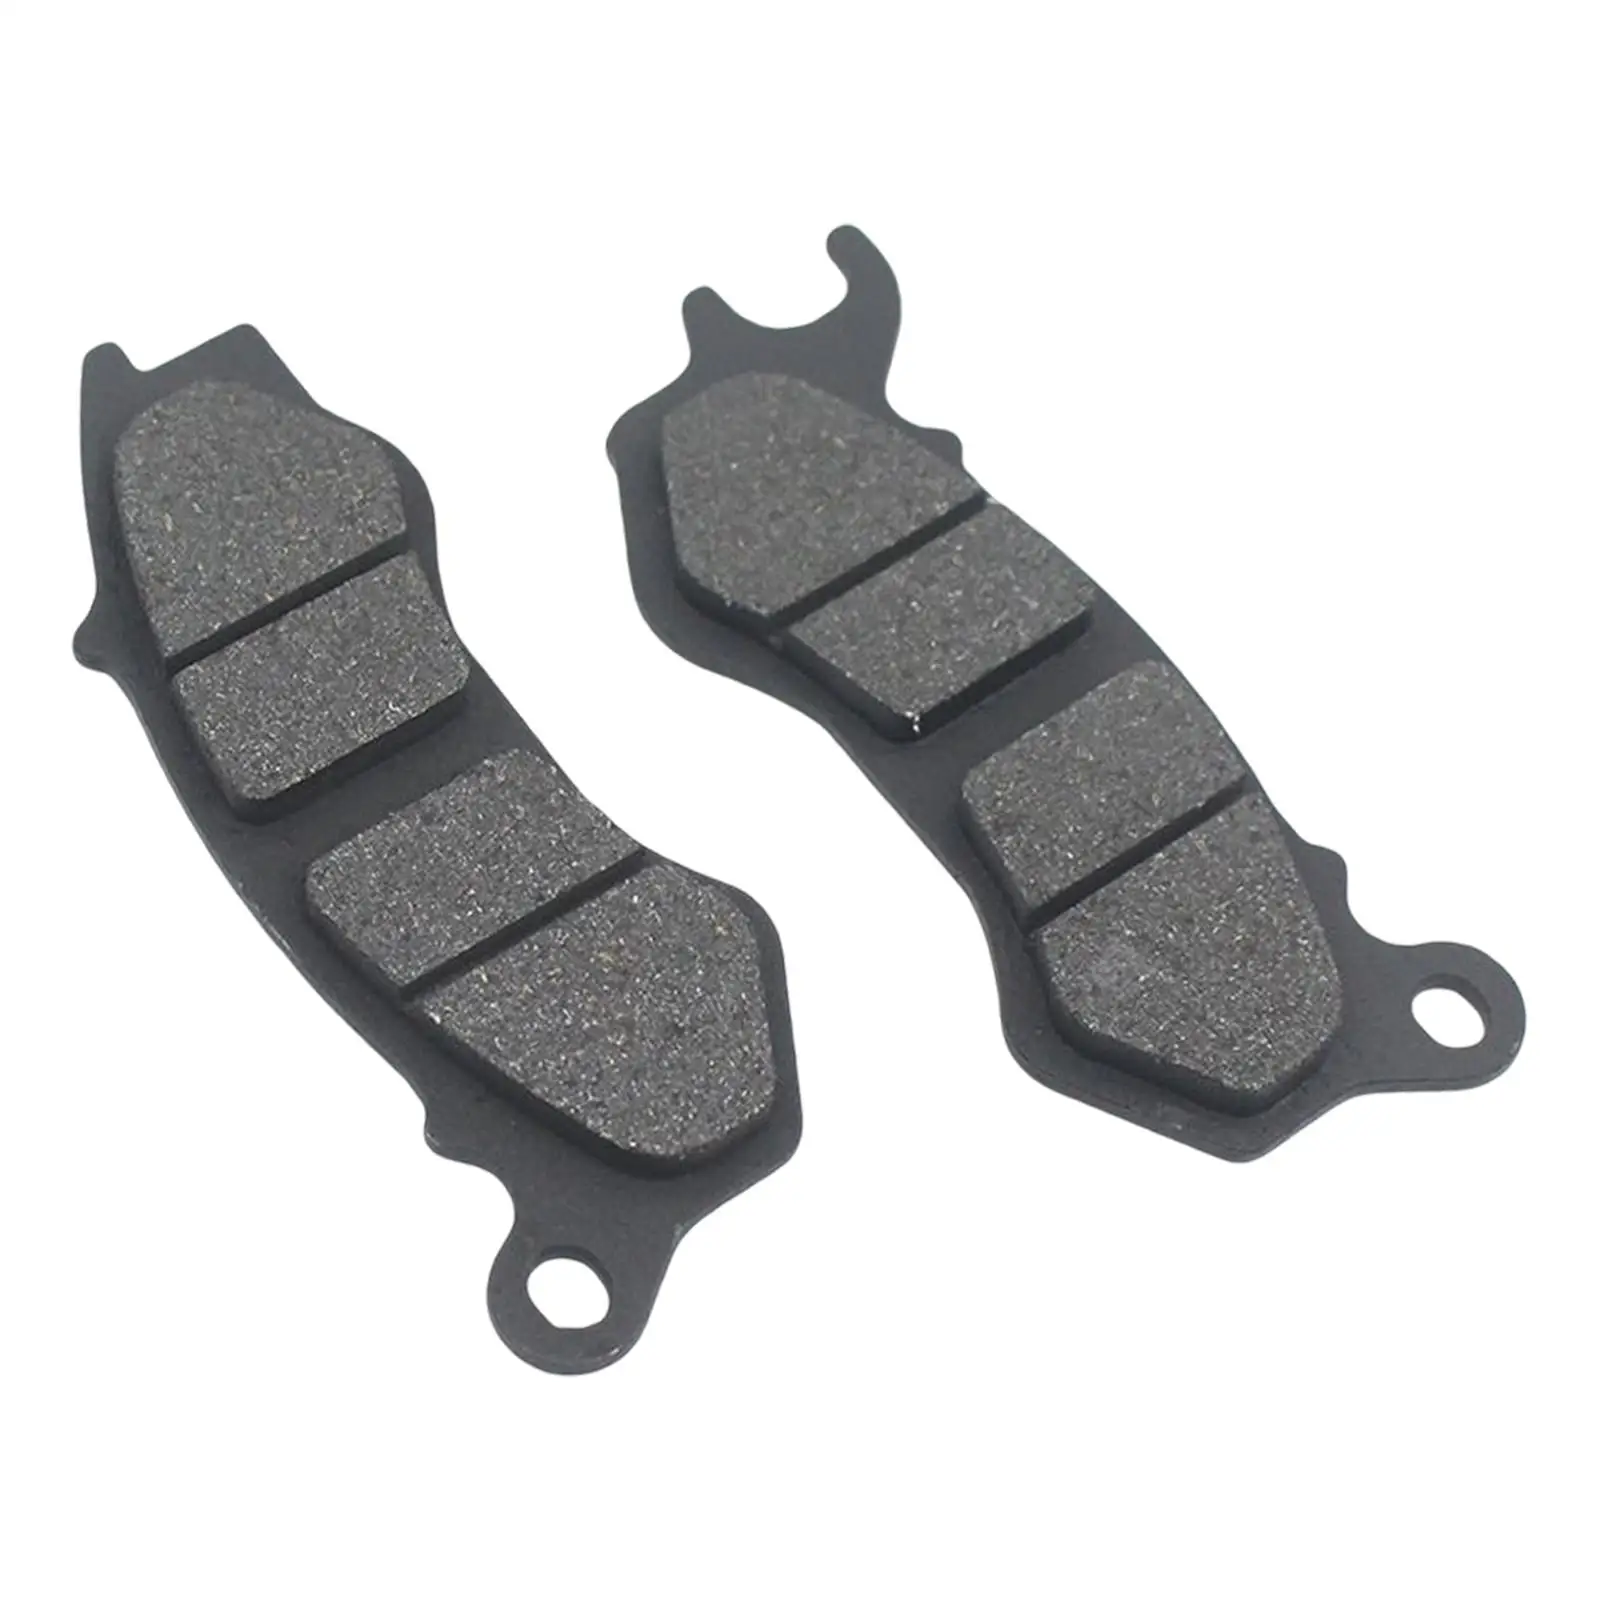 Front Brake Pads for Honda PCX 125 150 - High-Quality Wood Material, Eas... - £16.16 GBP